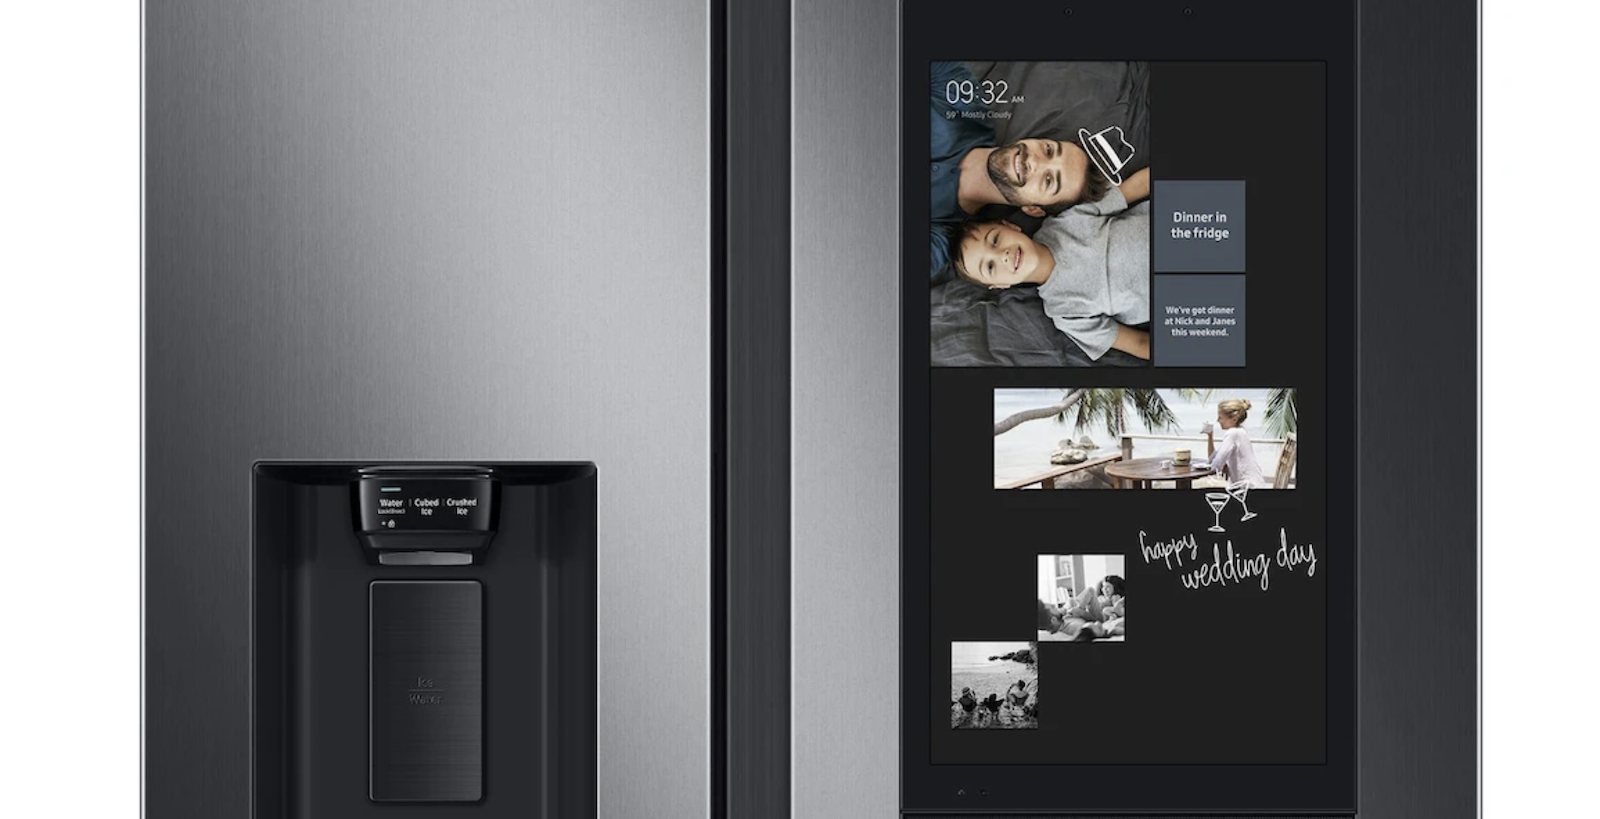 Close-up view of Samsung's Family Hub refrigerator door with screen and smart technology